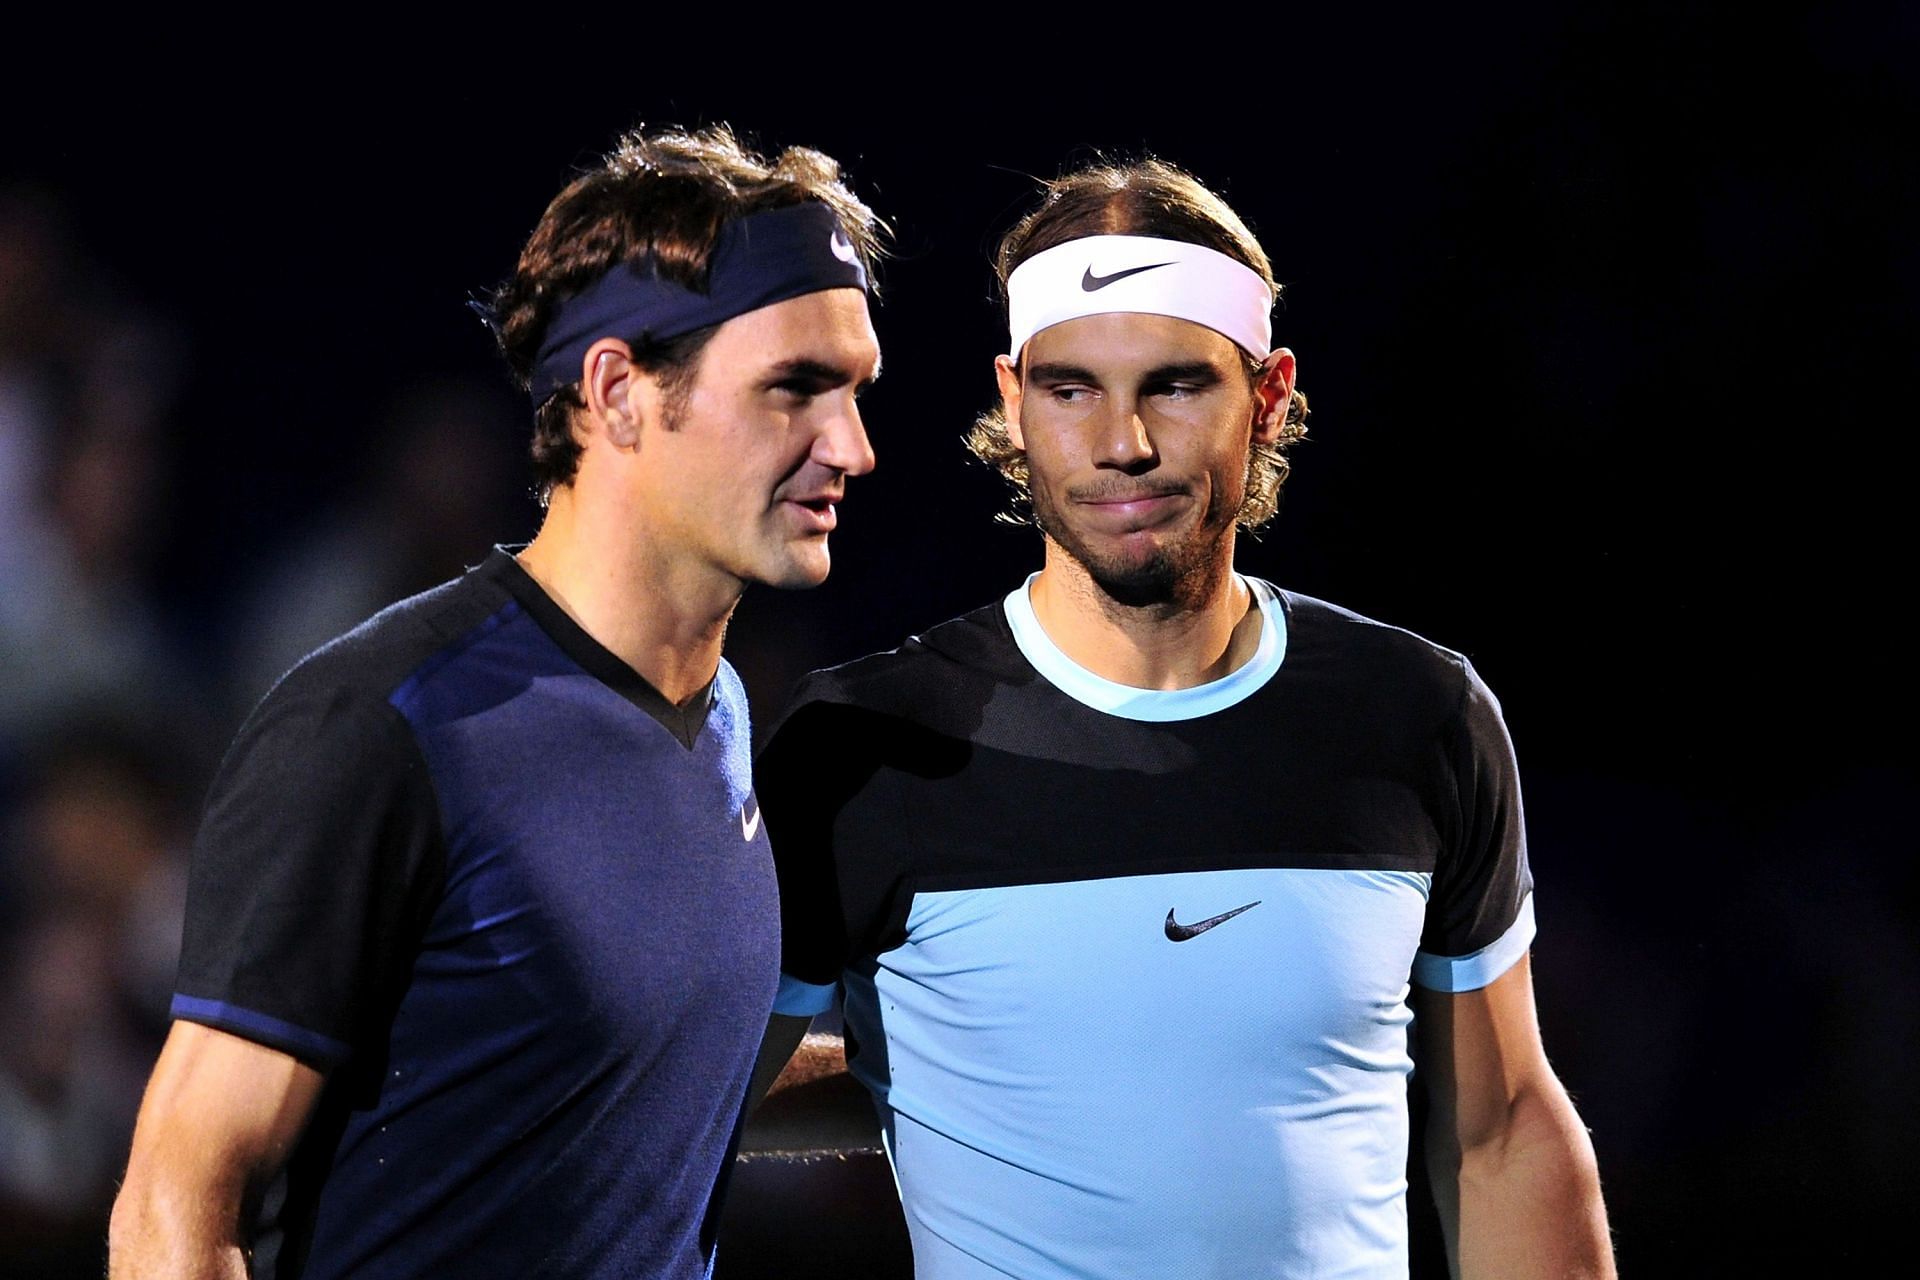 Federer and Nadal pose before the 2015 Swiss Indoors Basel final